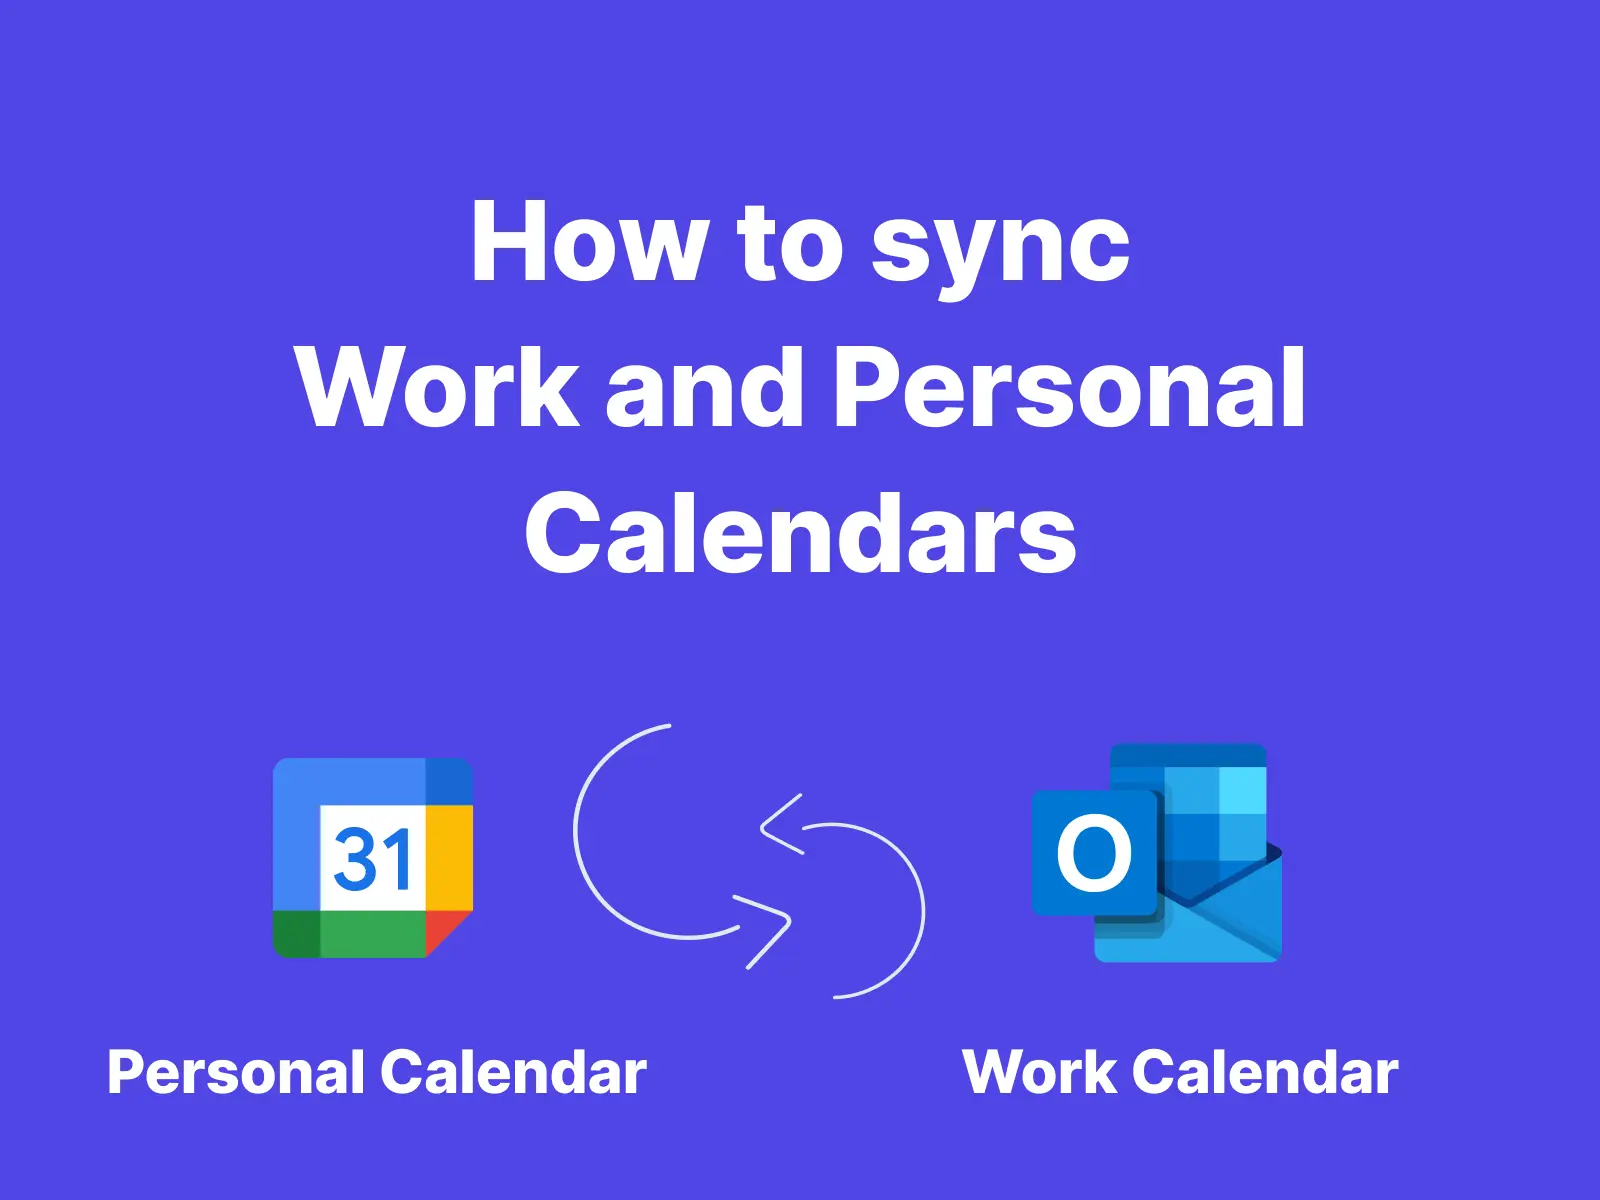 How to Sync Work and Personal Calendars